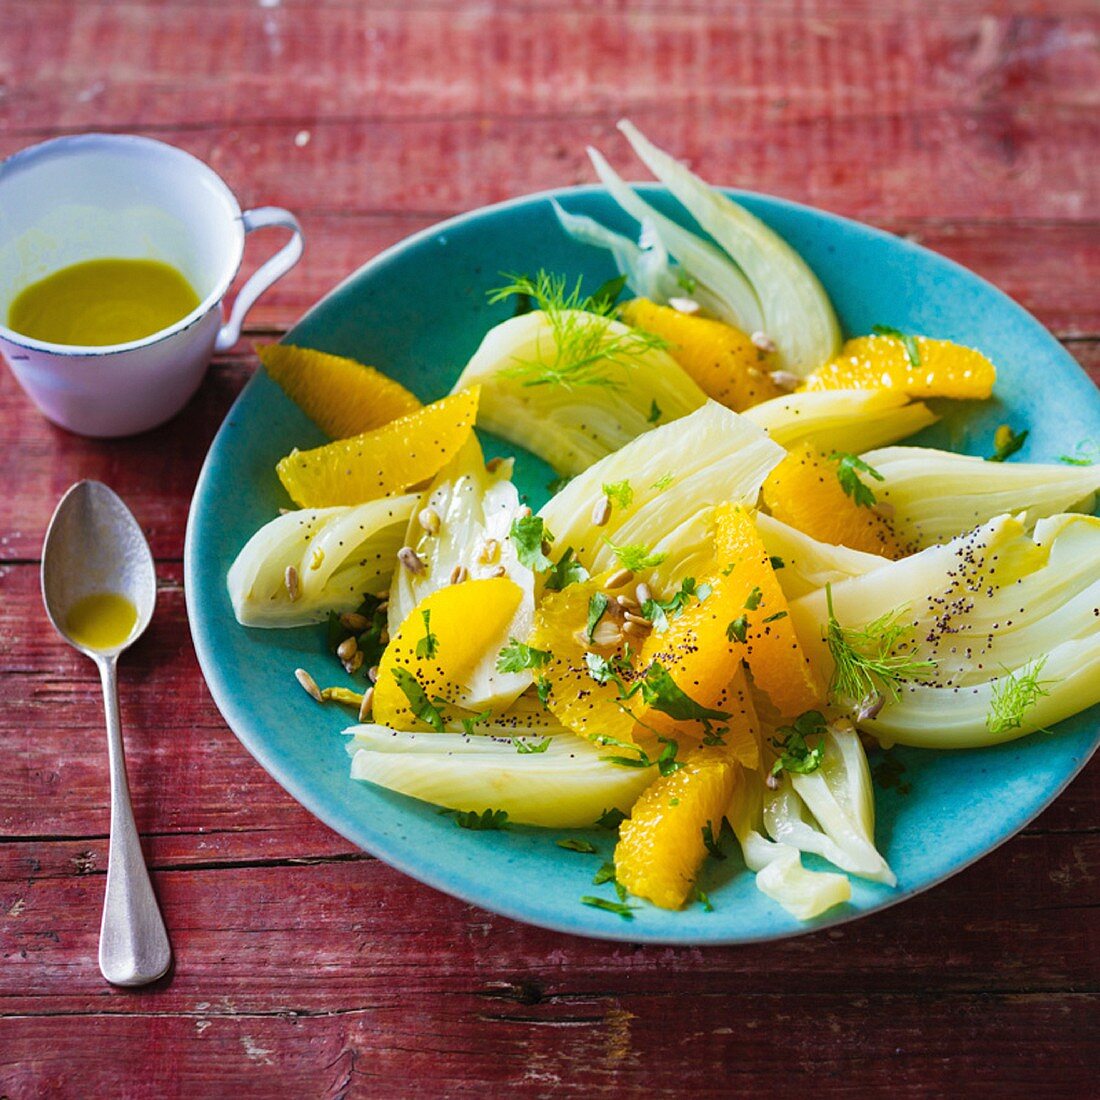 Fennel salad with oranges and coriander